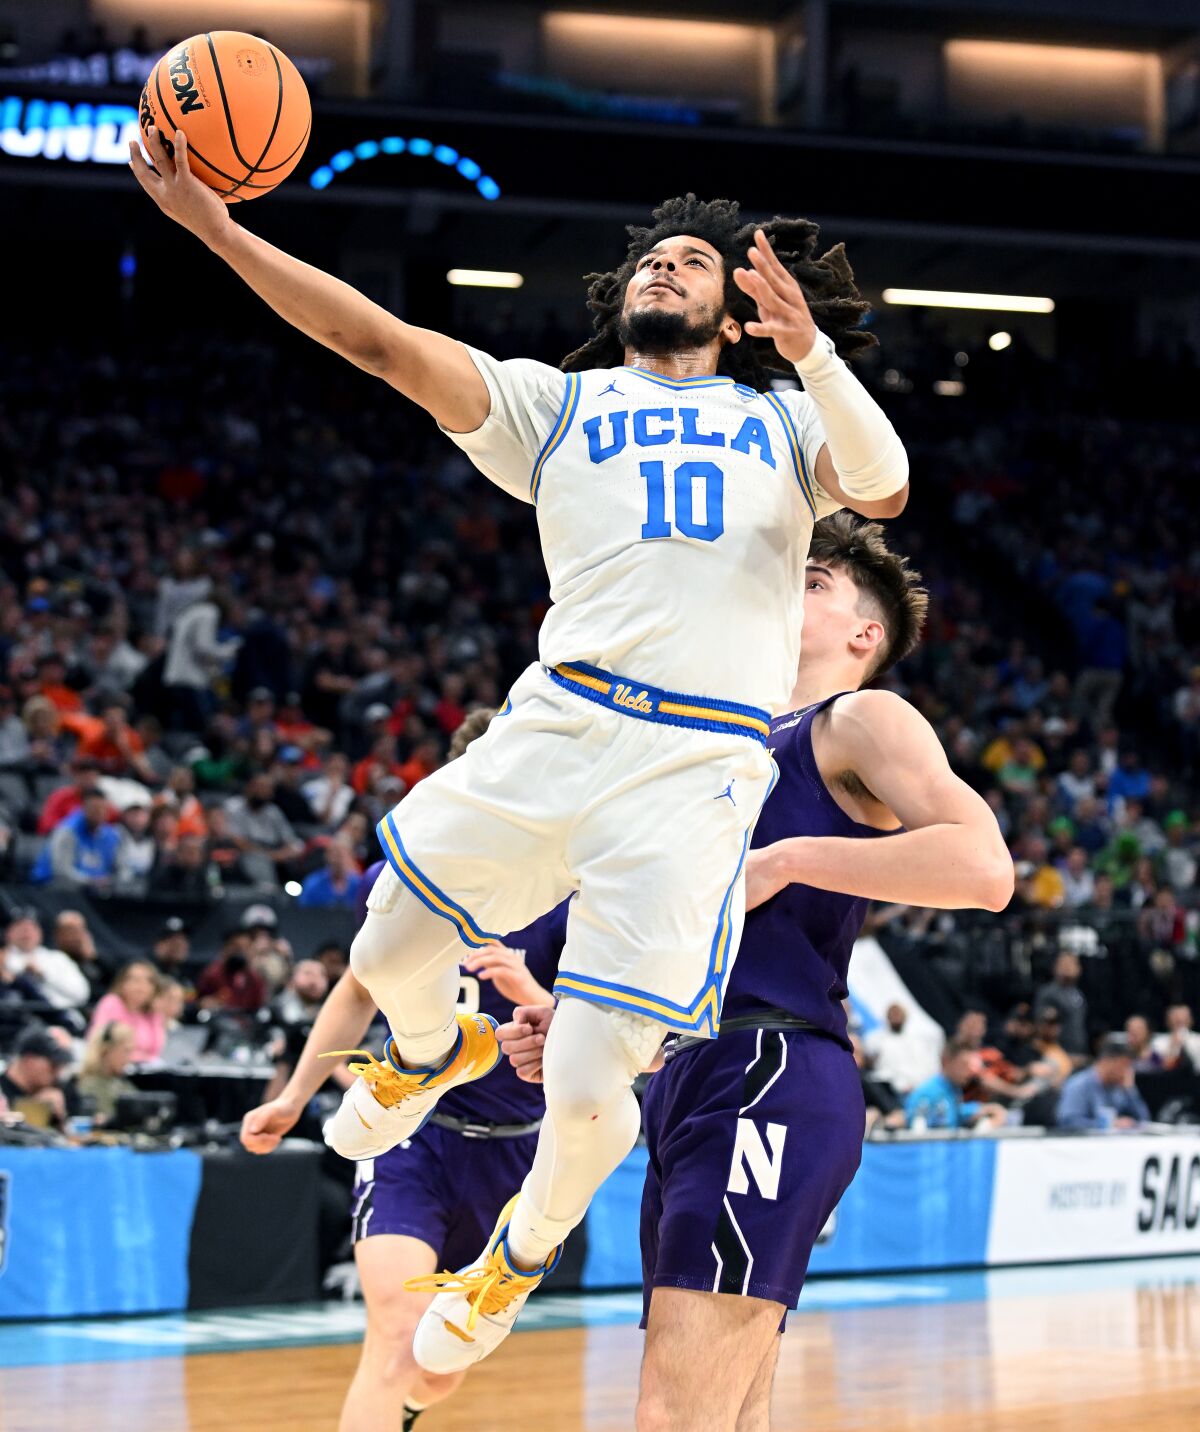 Tiger Campbell of UCLA hits a shot in the first half against Northwestern on Saturday.